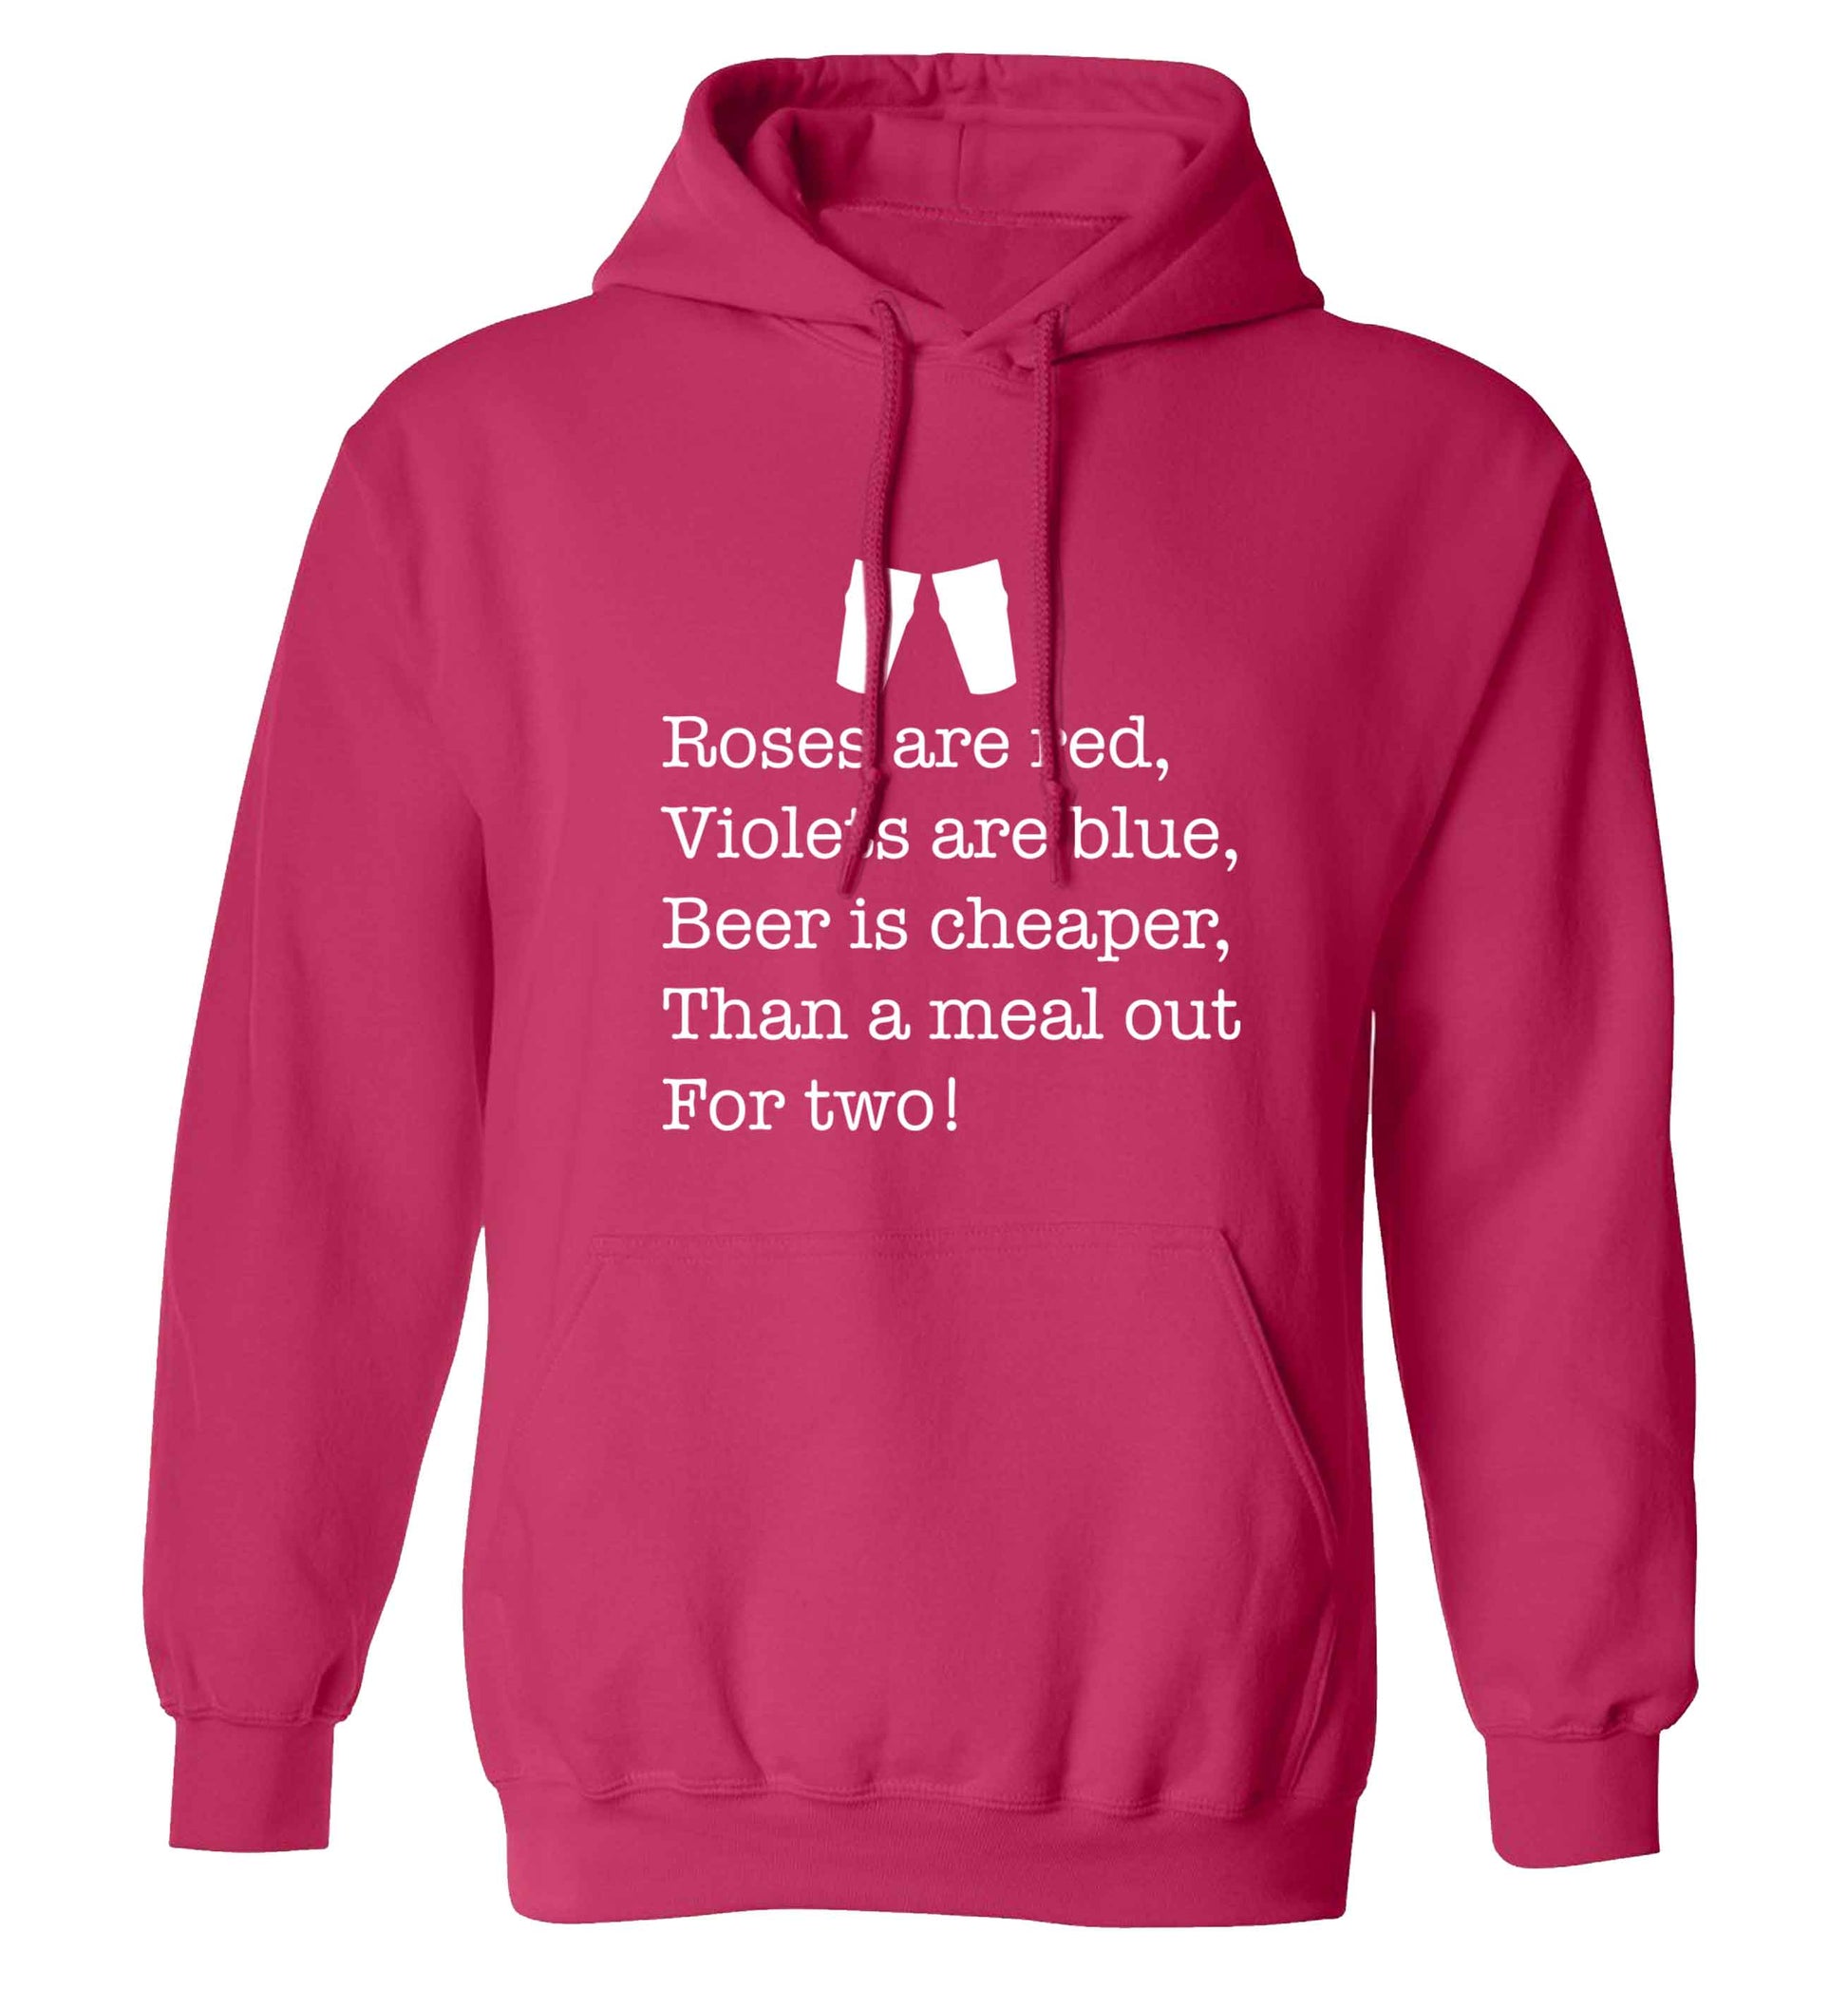 Roses are red violets are blue beer is cheaper than a meal out for two adults unisex pink hoodie 2XL